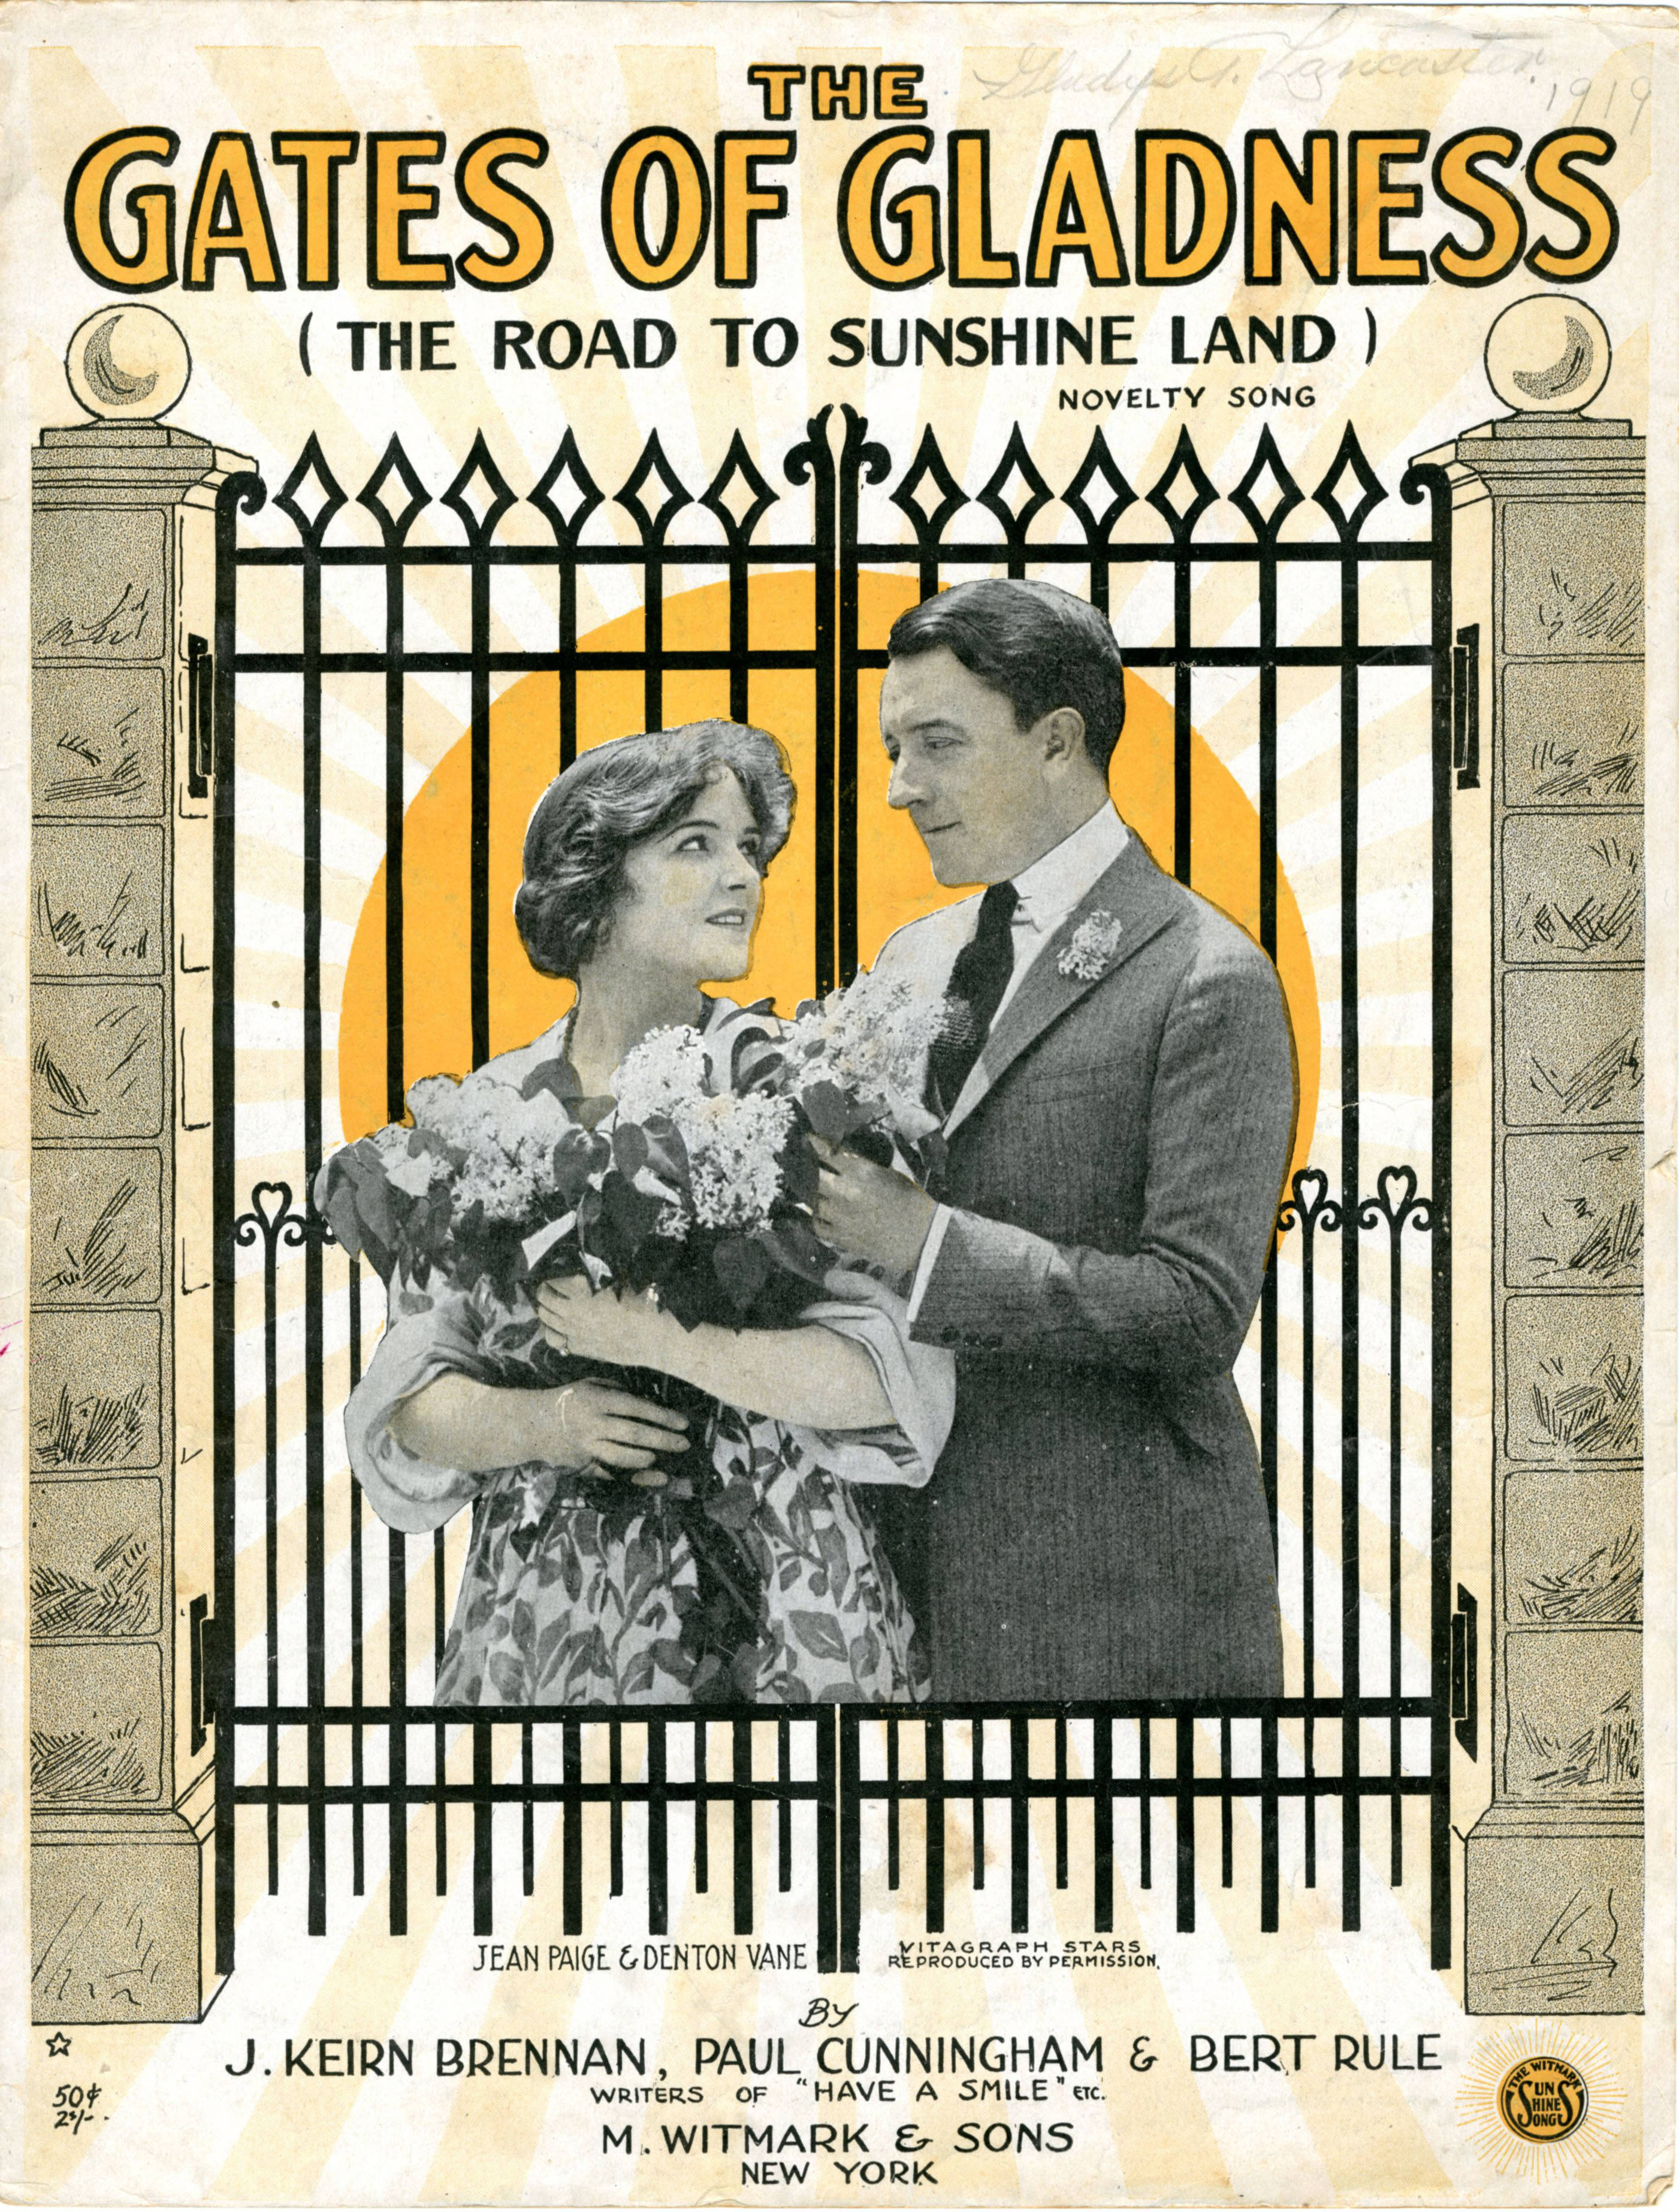 Sheet music cover - THE GATES OF GLADNESS - ON THE ROAD TO SUNSHINE LAND (1919)